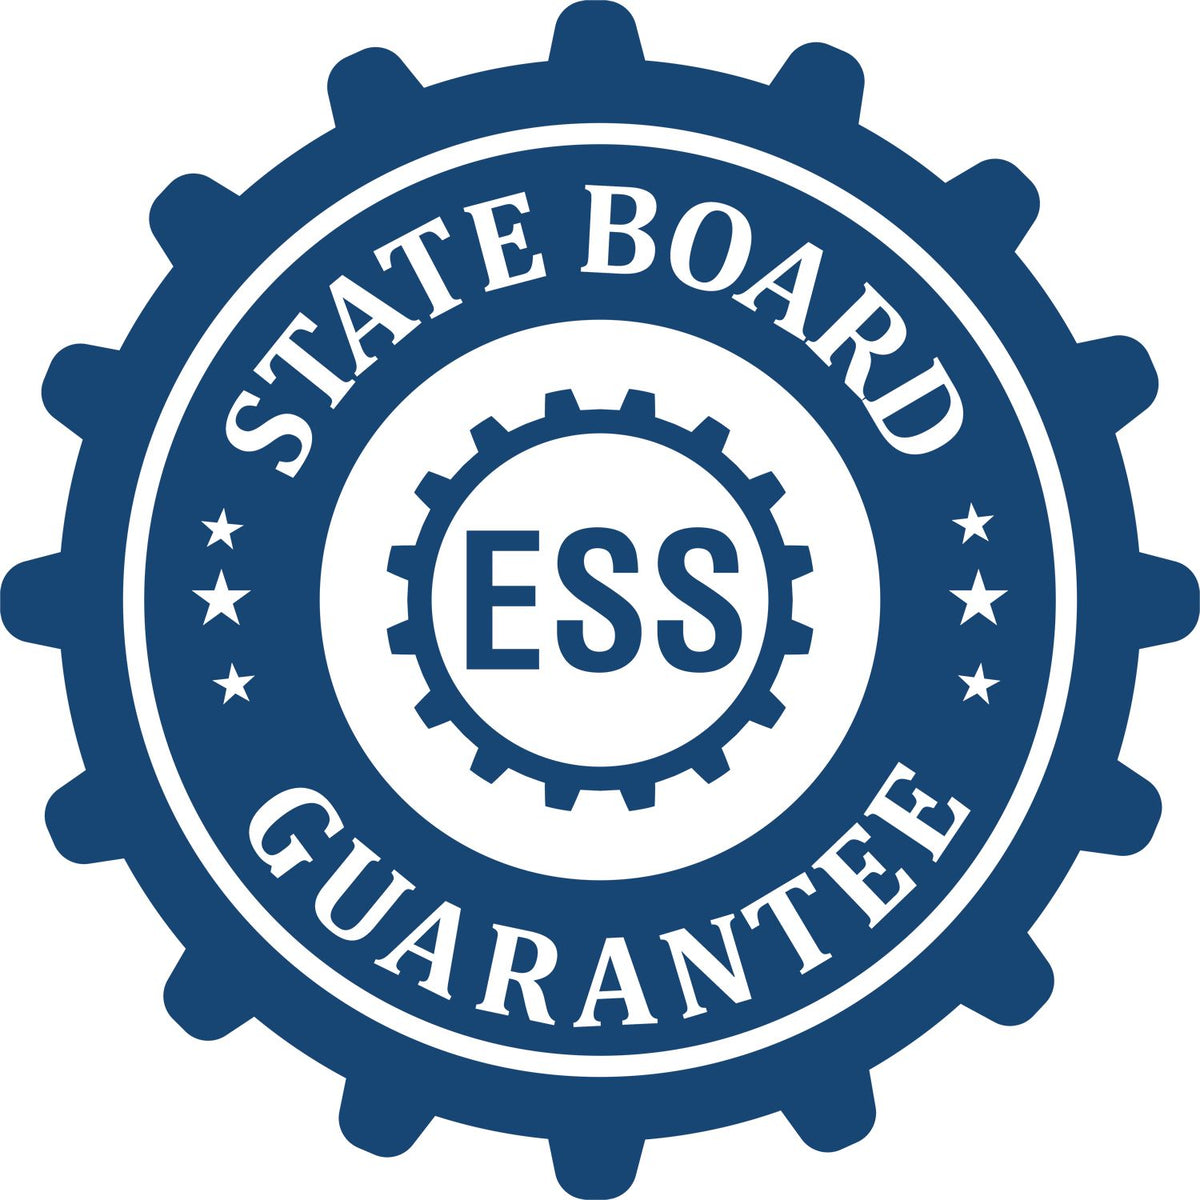 An emblem in a gear shape illustrating a state board guarantee for the Heavy-Duty Illinois Rectangular Notary Stamp product.